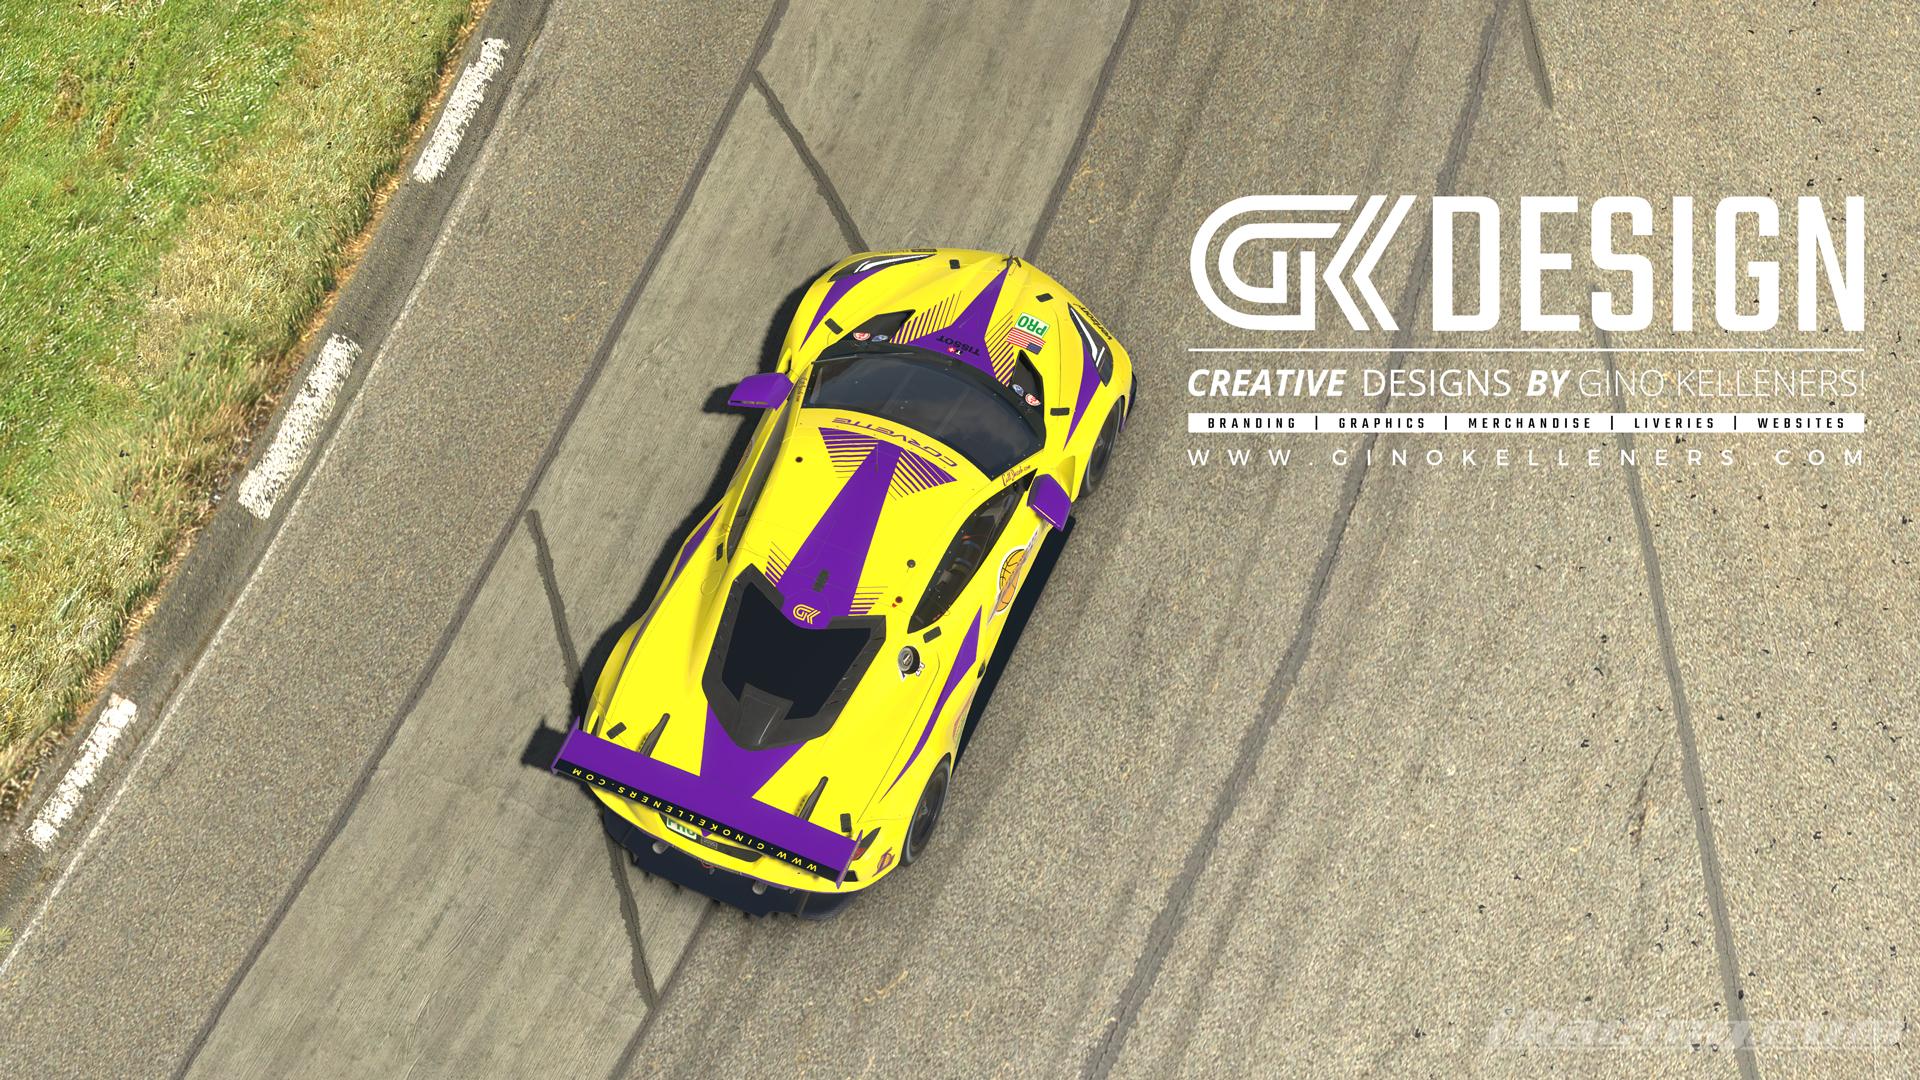 Preview of LA Lakers Livery - Chevrolet Corvette C8.R GTE  by Gino Kelleners